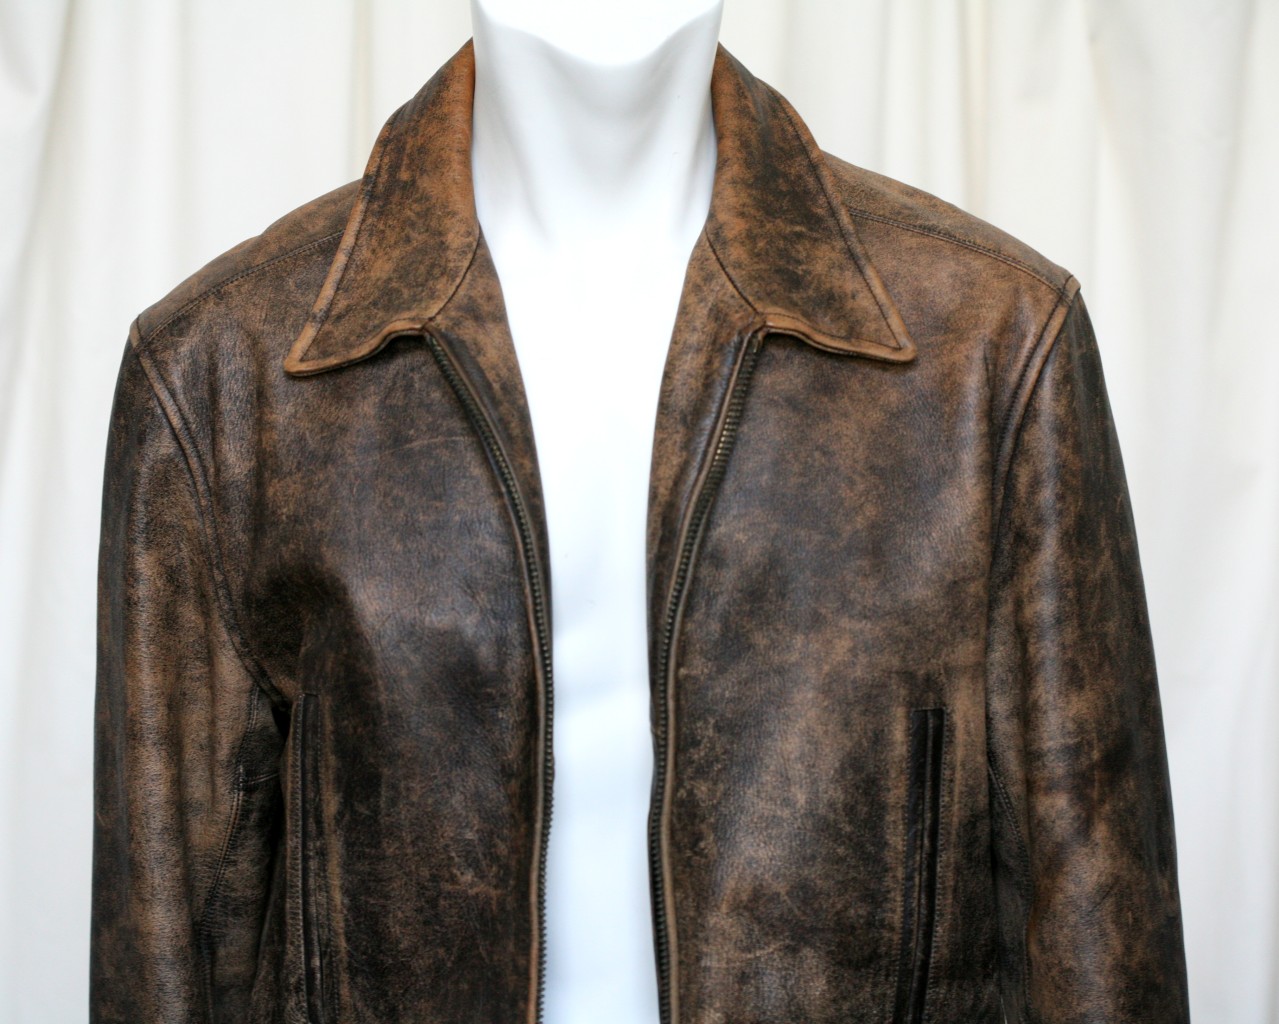 LOUIS VUITTON Mens Marled-Brown+Tan Thick Leather Jacket Coat+Multi-Pocket 40/50 | eBay